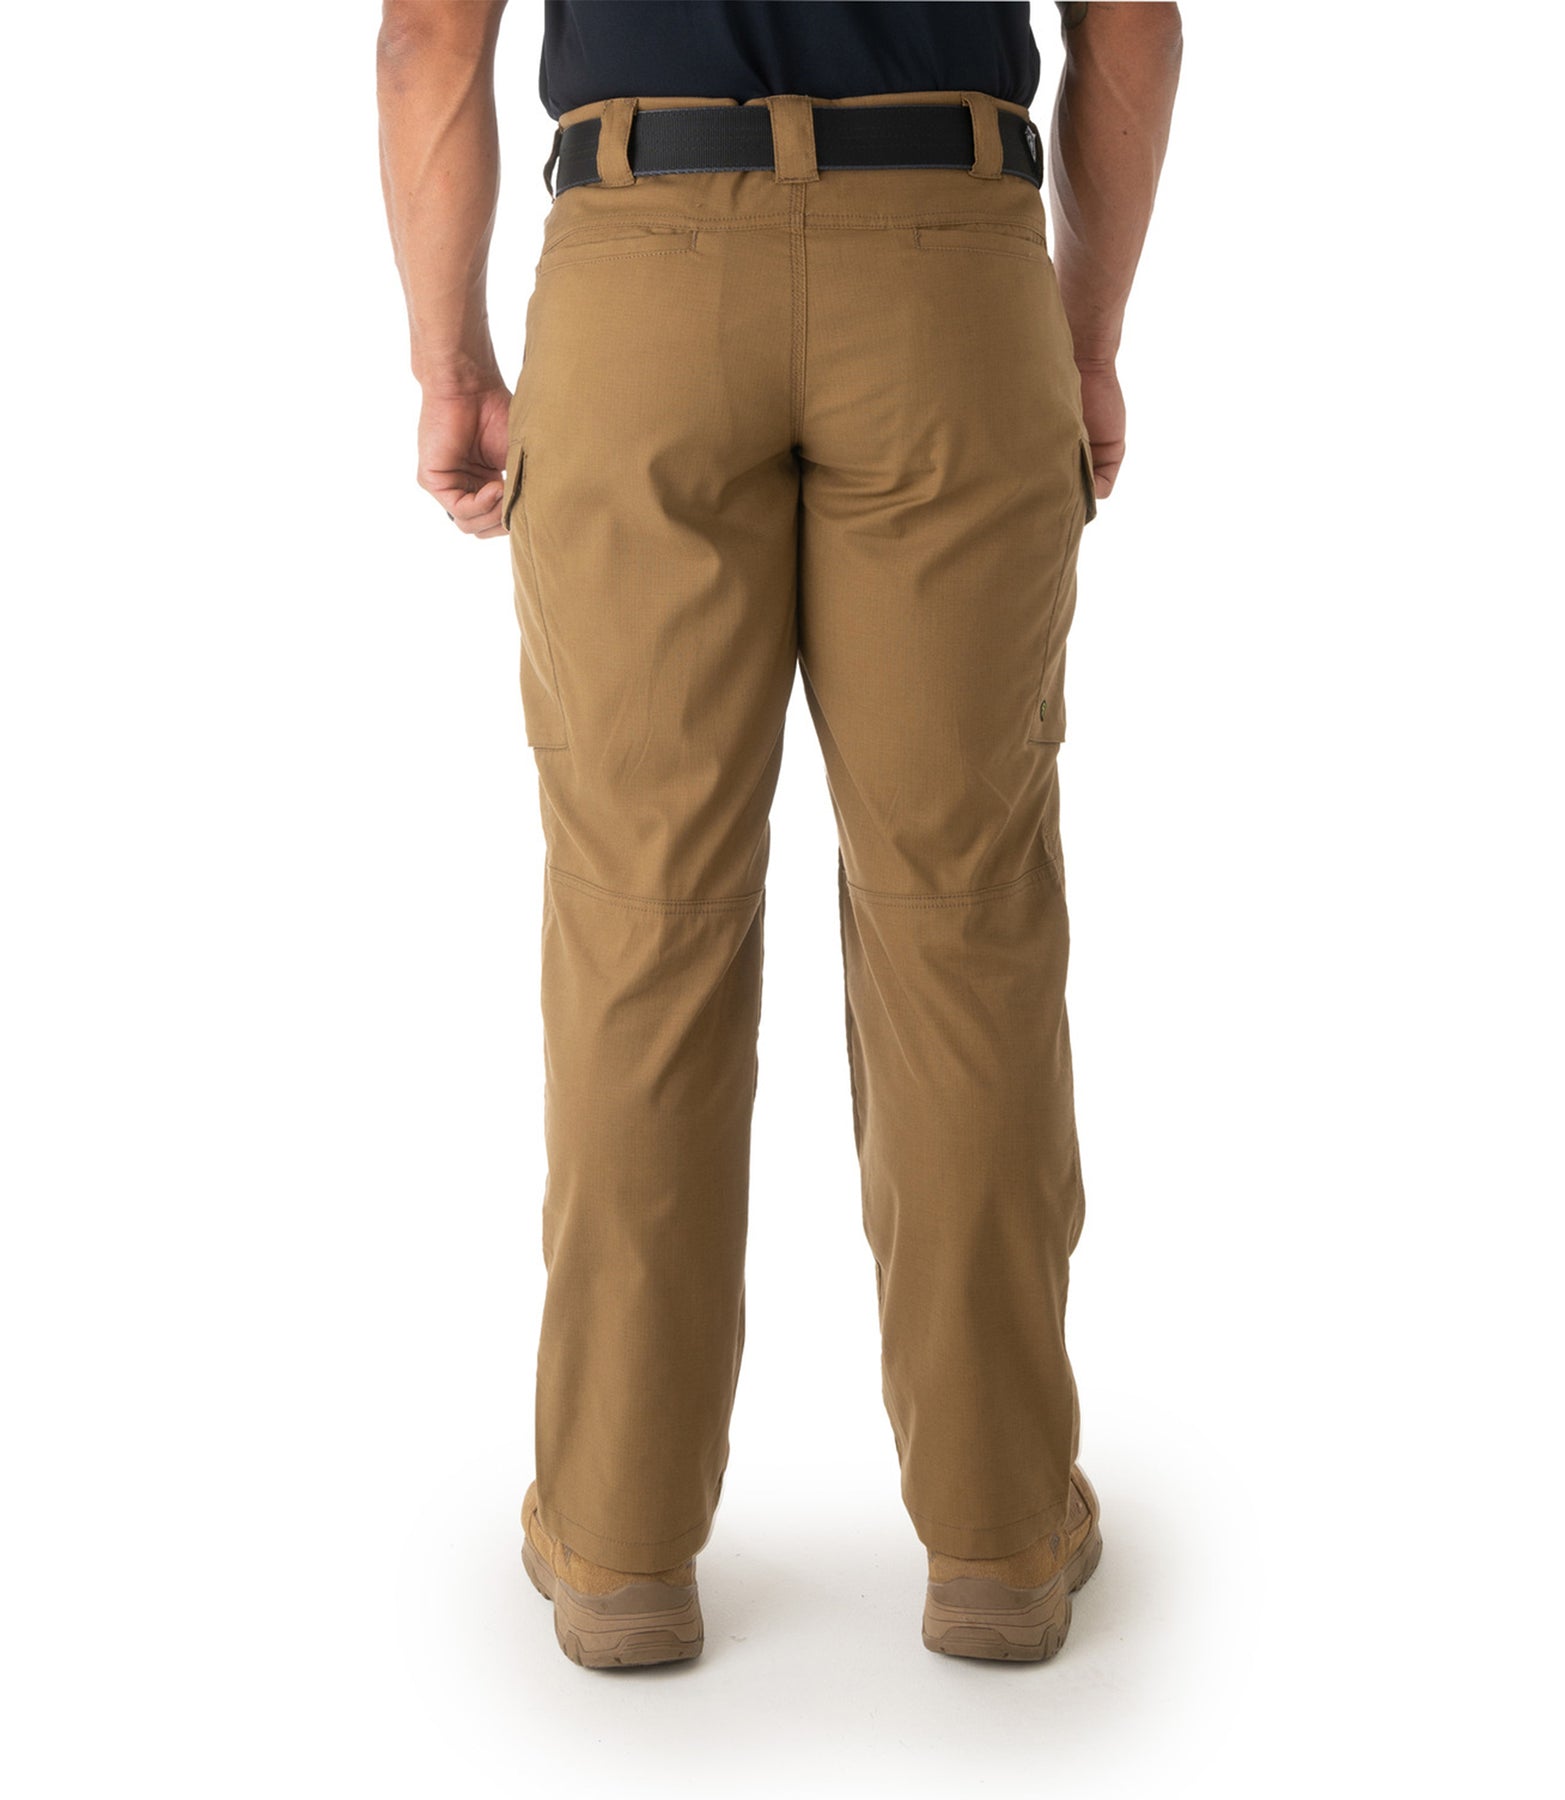 Men's V2 Tactical Pants / Coyote Brown – First Tactical